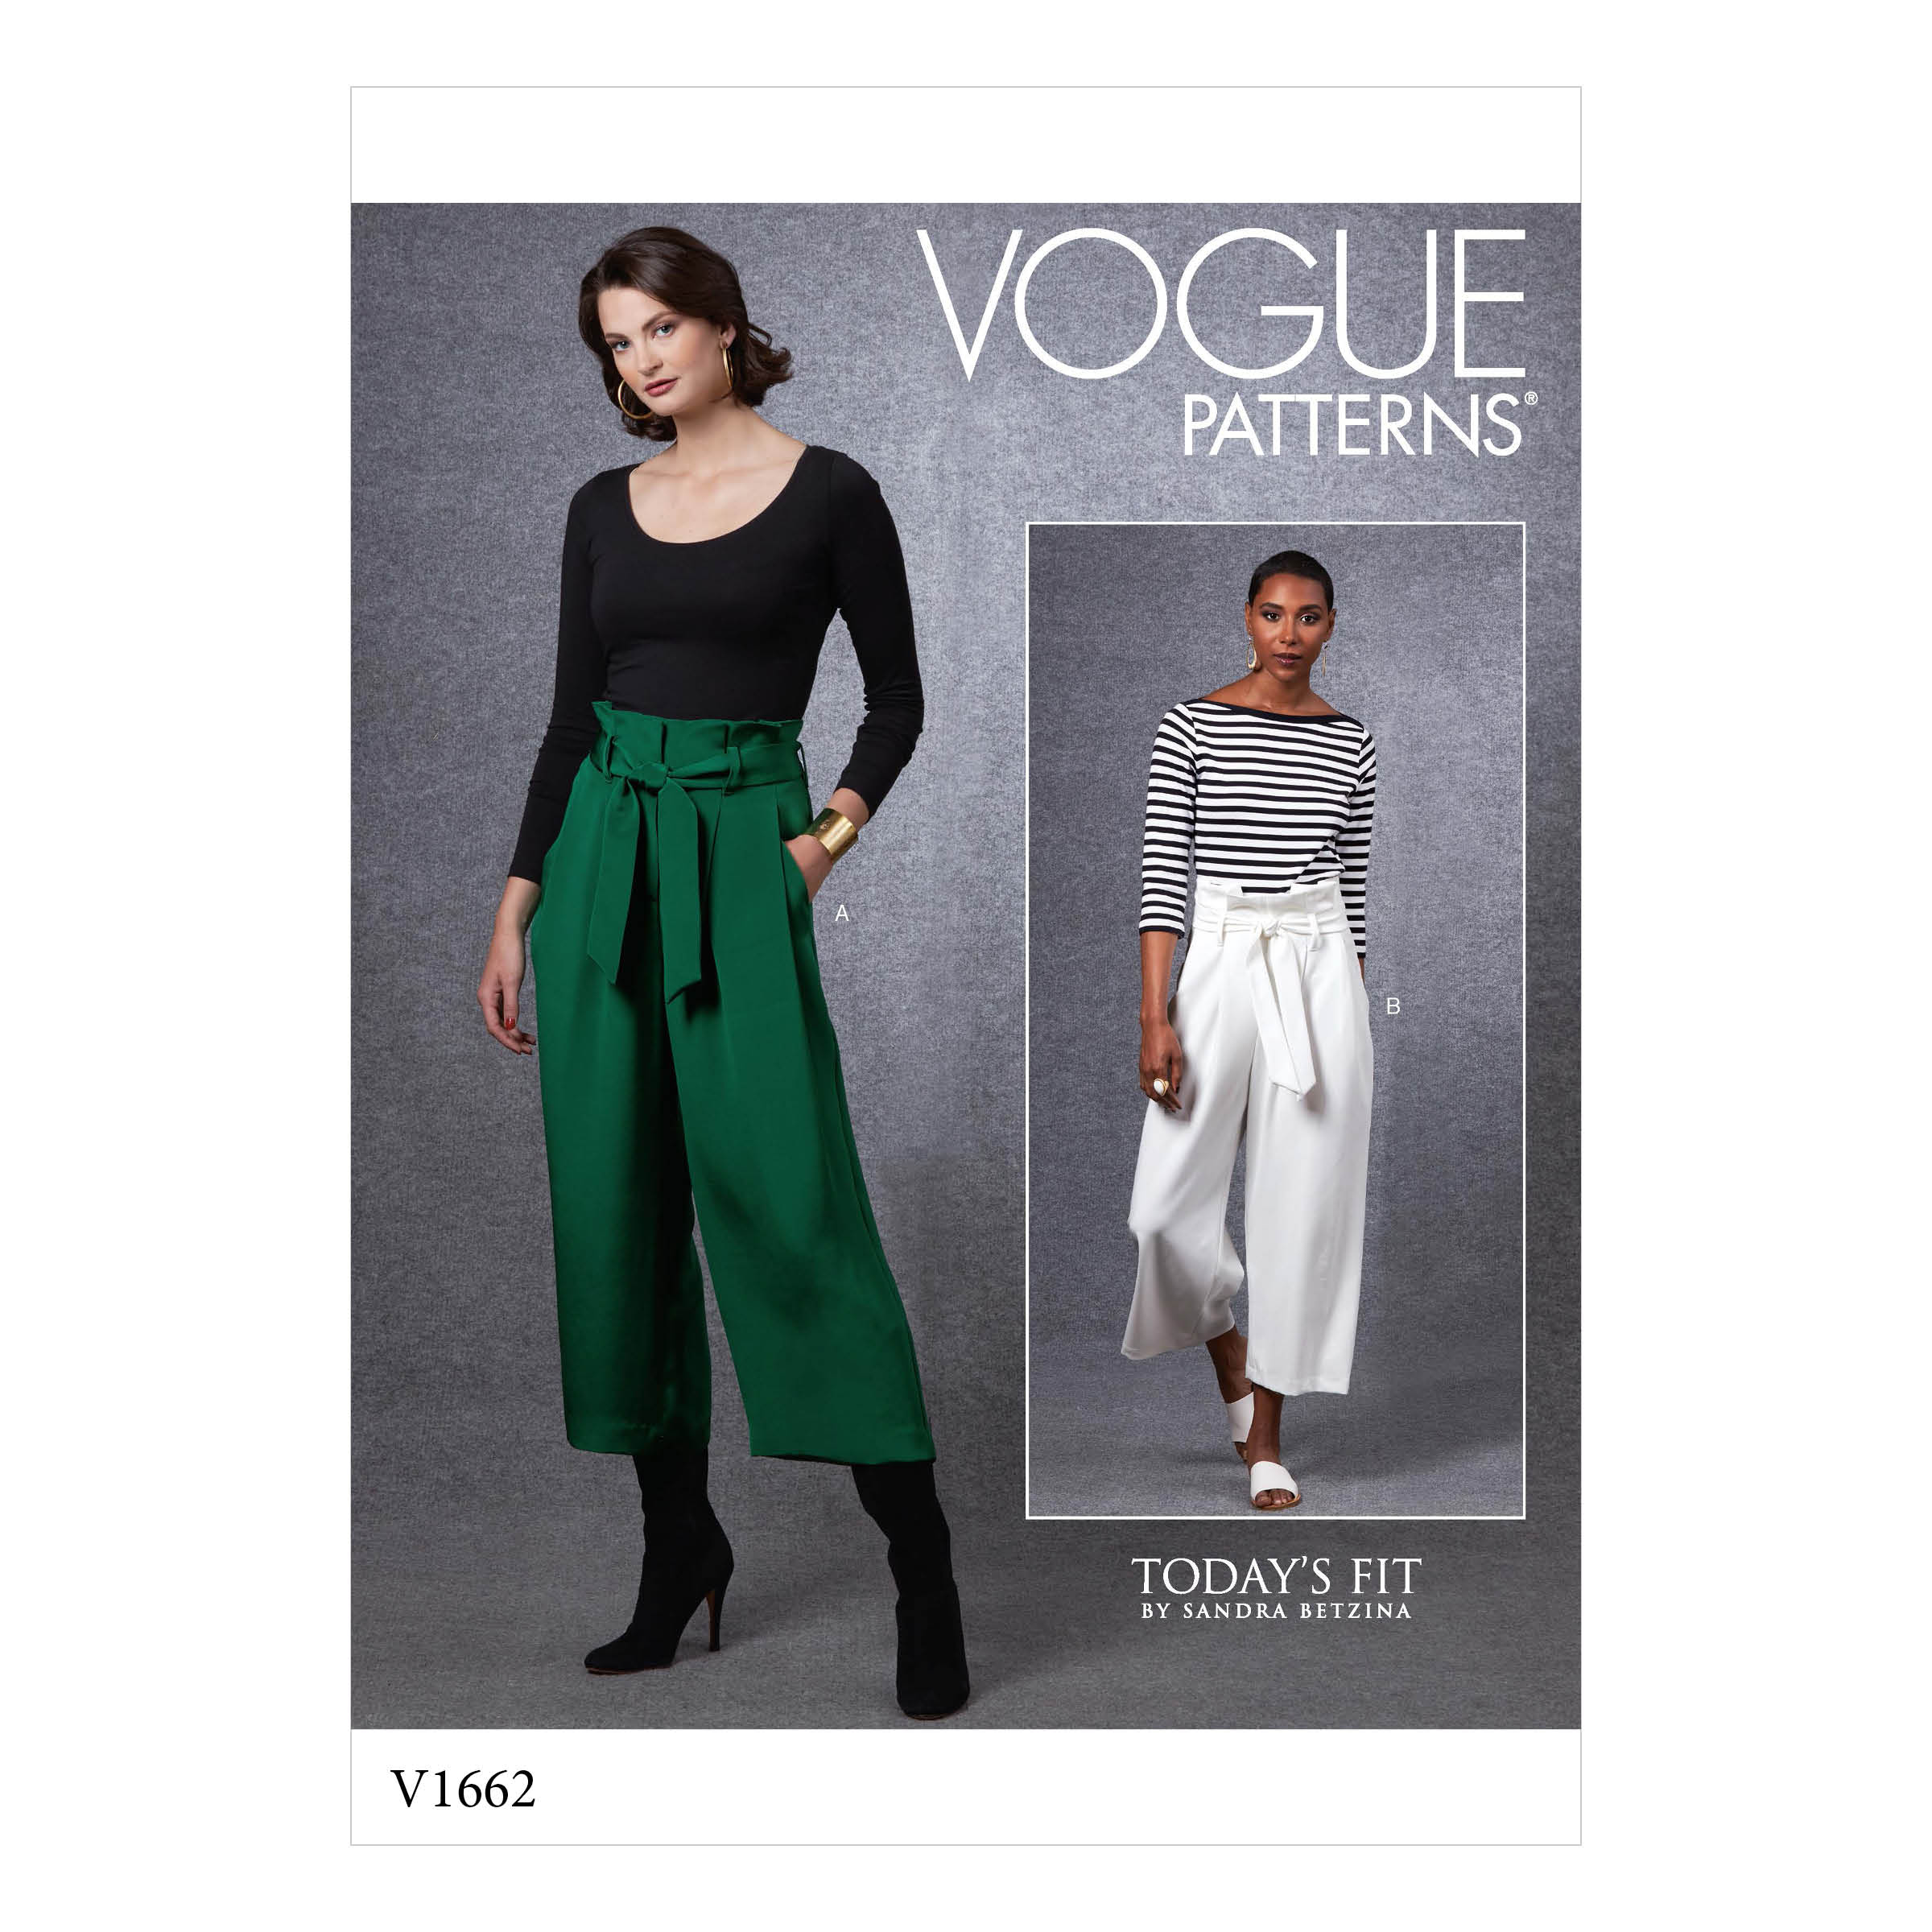 Vogue Patterns MISSES' SLEEVELESS PEPLUM TOP AND WIDE-LEG PANTS 1572  pattern review by yas1282